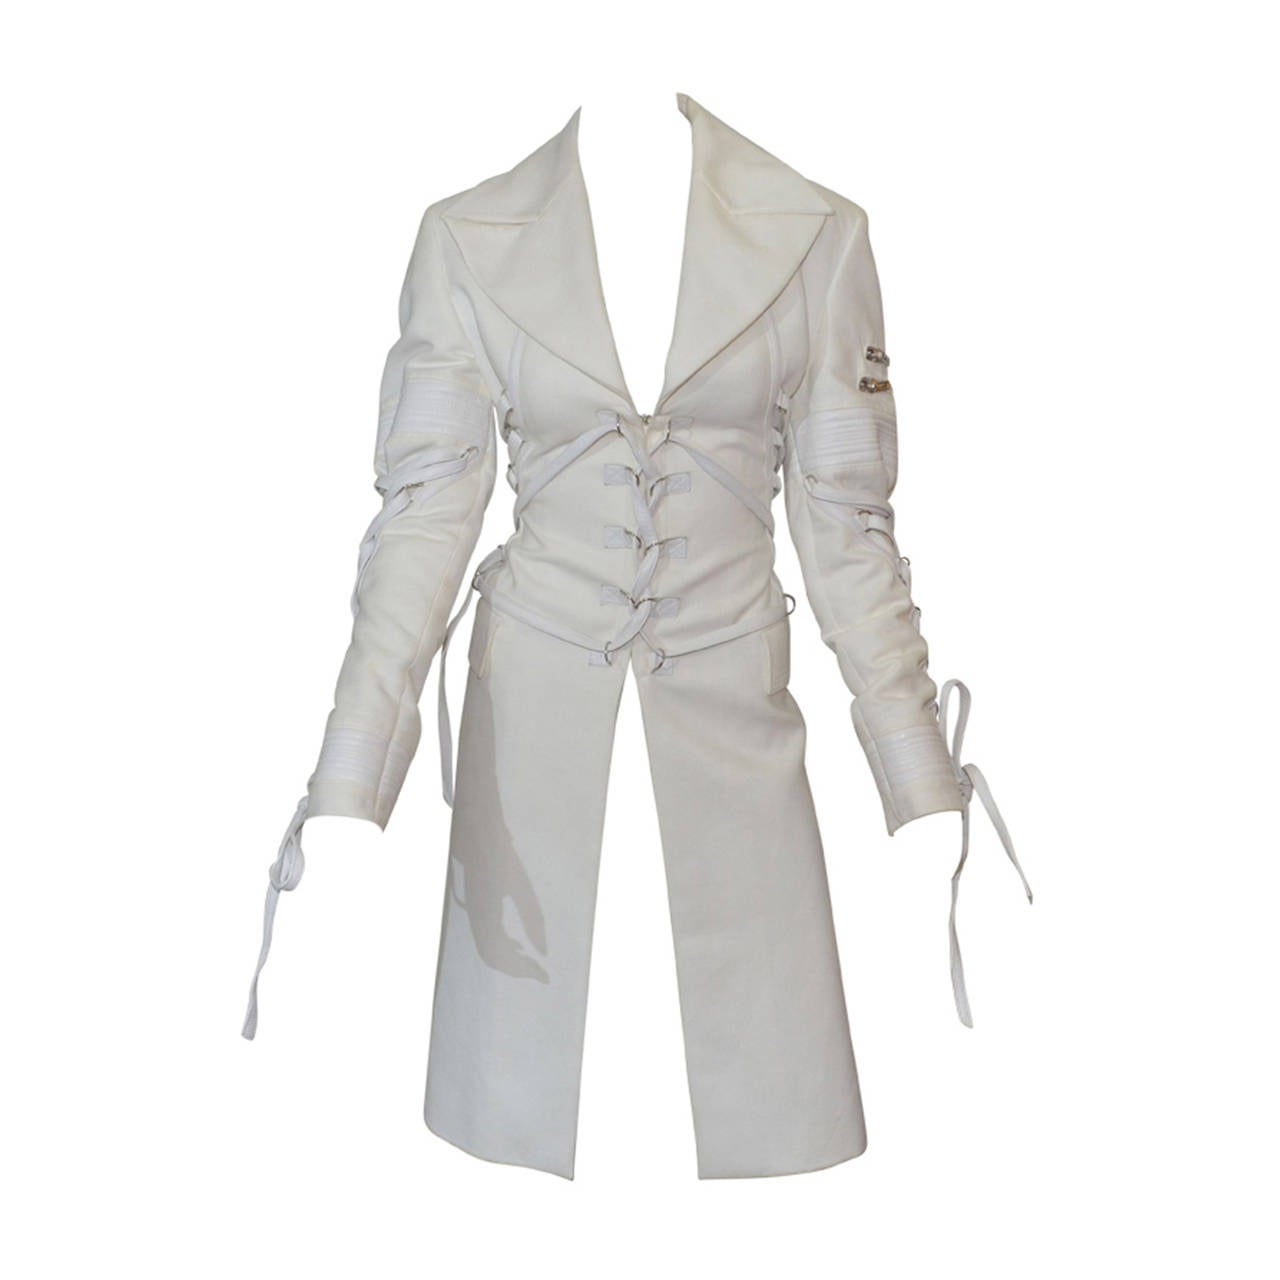 White Versace coat features a Corset style leather laces at front, sleeve and back. Front hook-and-eye closures. There are silver-tone rivets along the front, back, and cuffs of the coat for the leather lace-up tie detail. Left sleeve offers 2 small